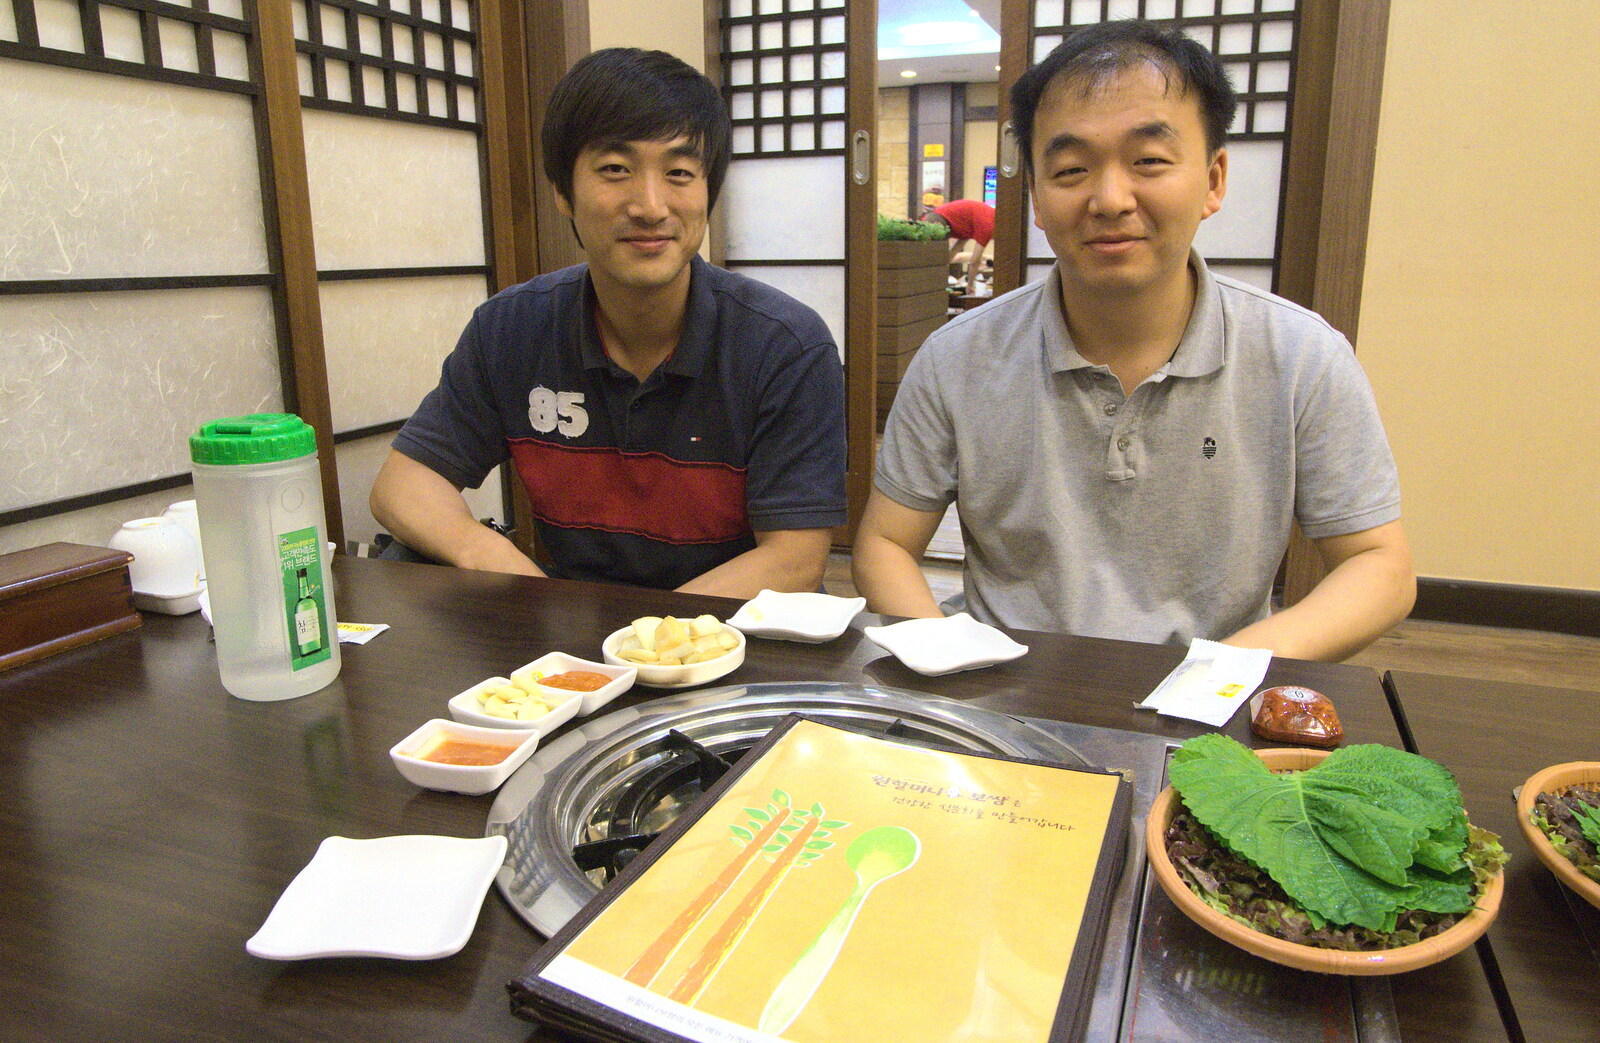 The lads take Nosher out for a feed from Seomun Market, Daegu, South Korea - 1st July 2012